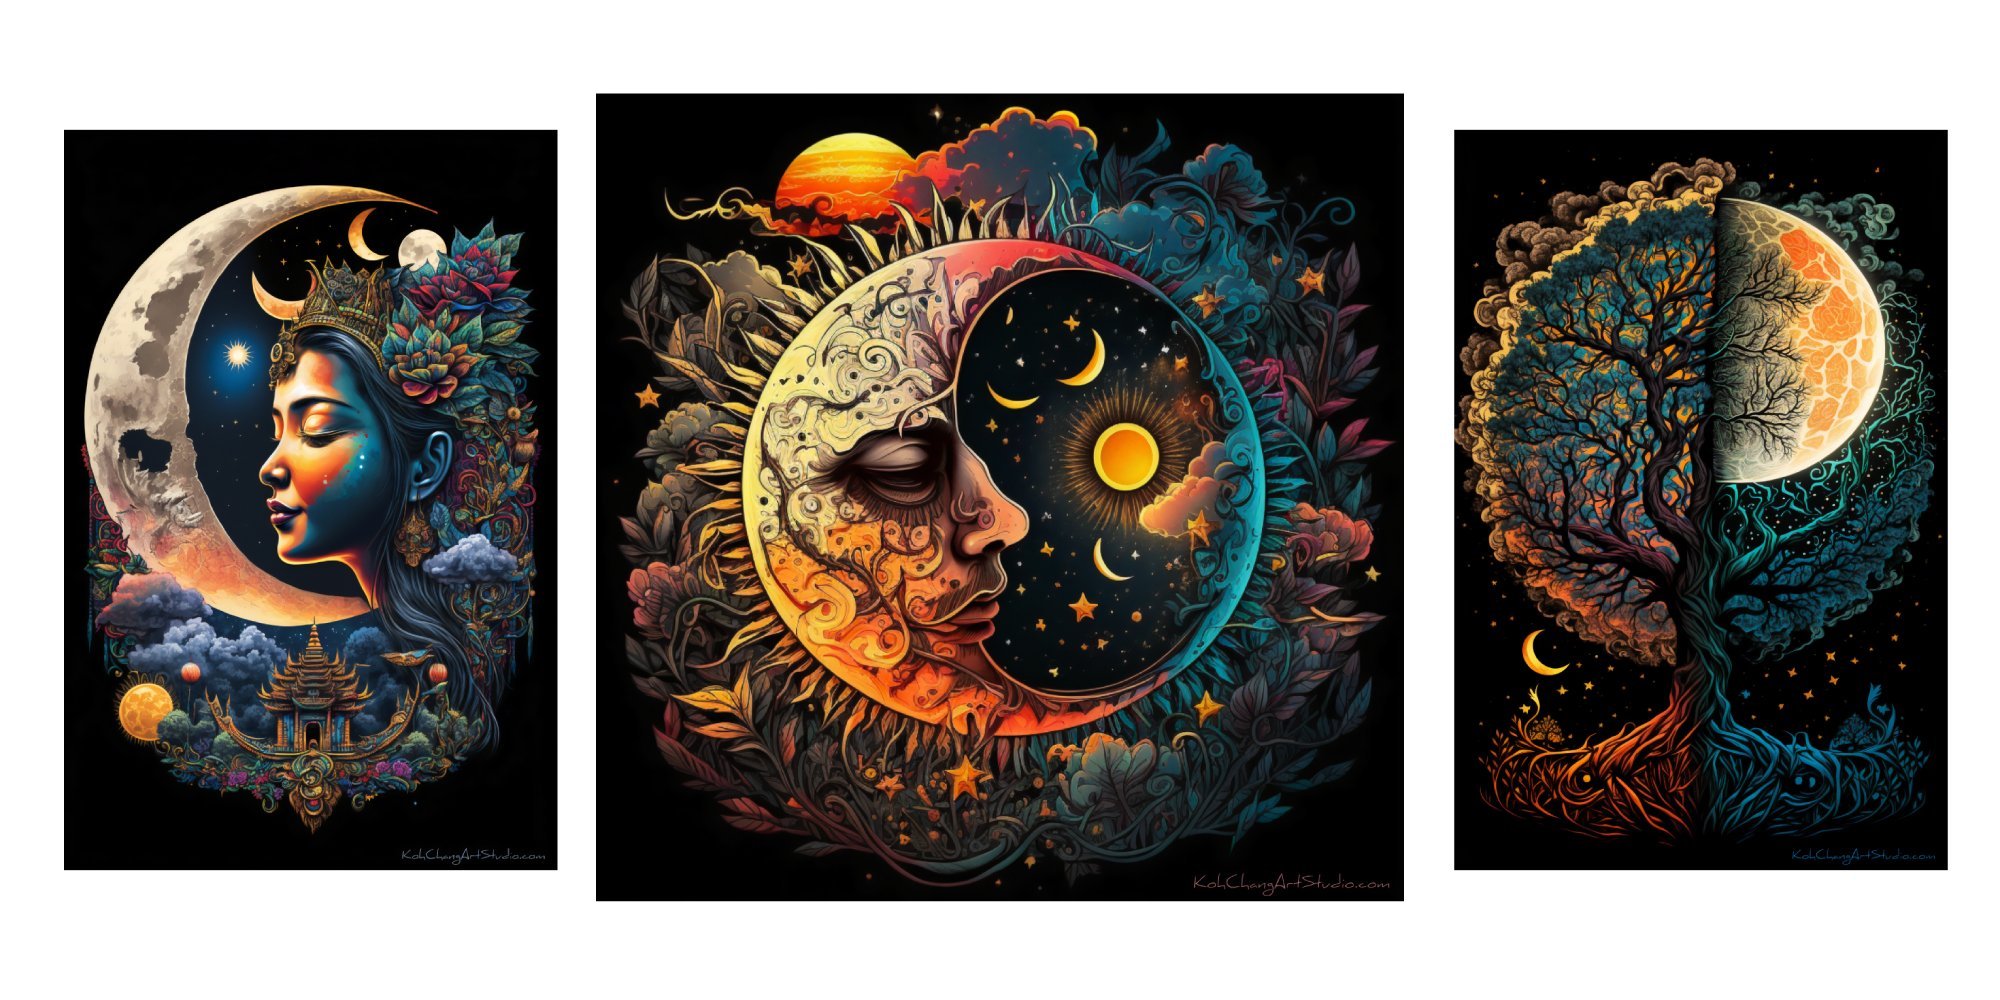 LUNA LUMINIS Design - Woman's grace, tree's transformation, and the vast night sky's story.